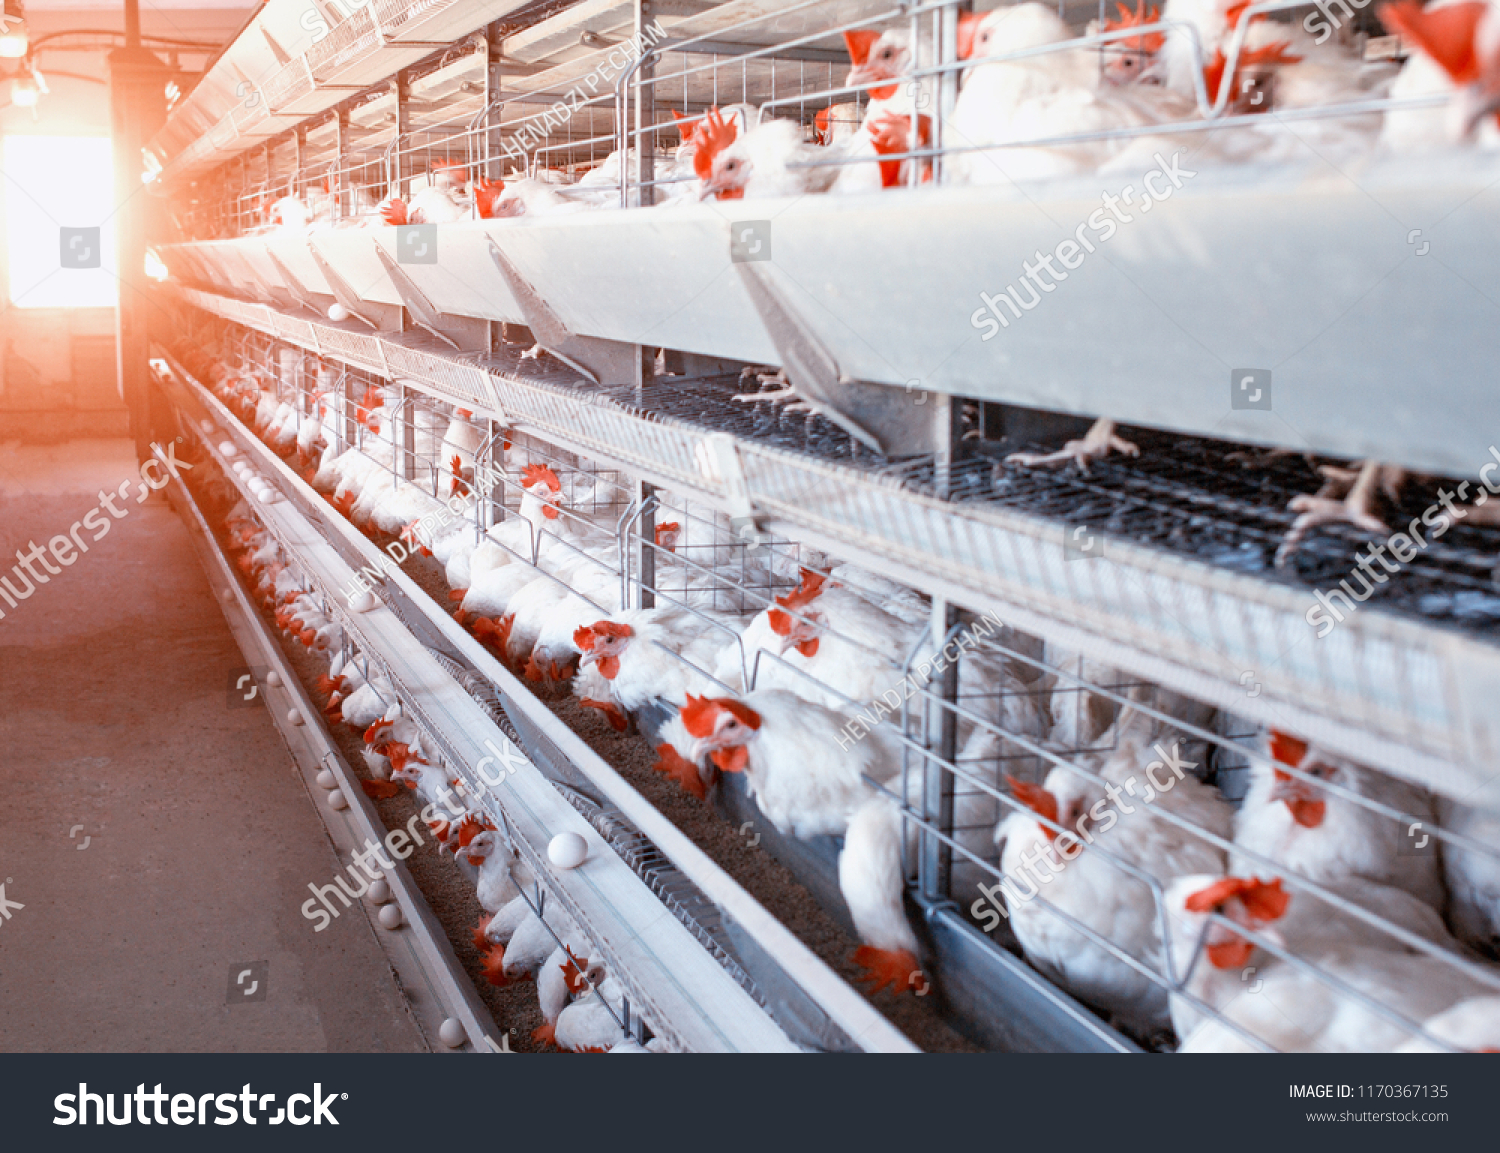 Poultry farm, chickens sit in open-air cages and eat mixed feed, on conveyor belts lie hen's eggs, modern farming, the sun #1170367135